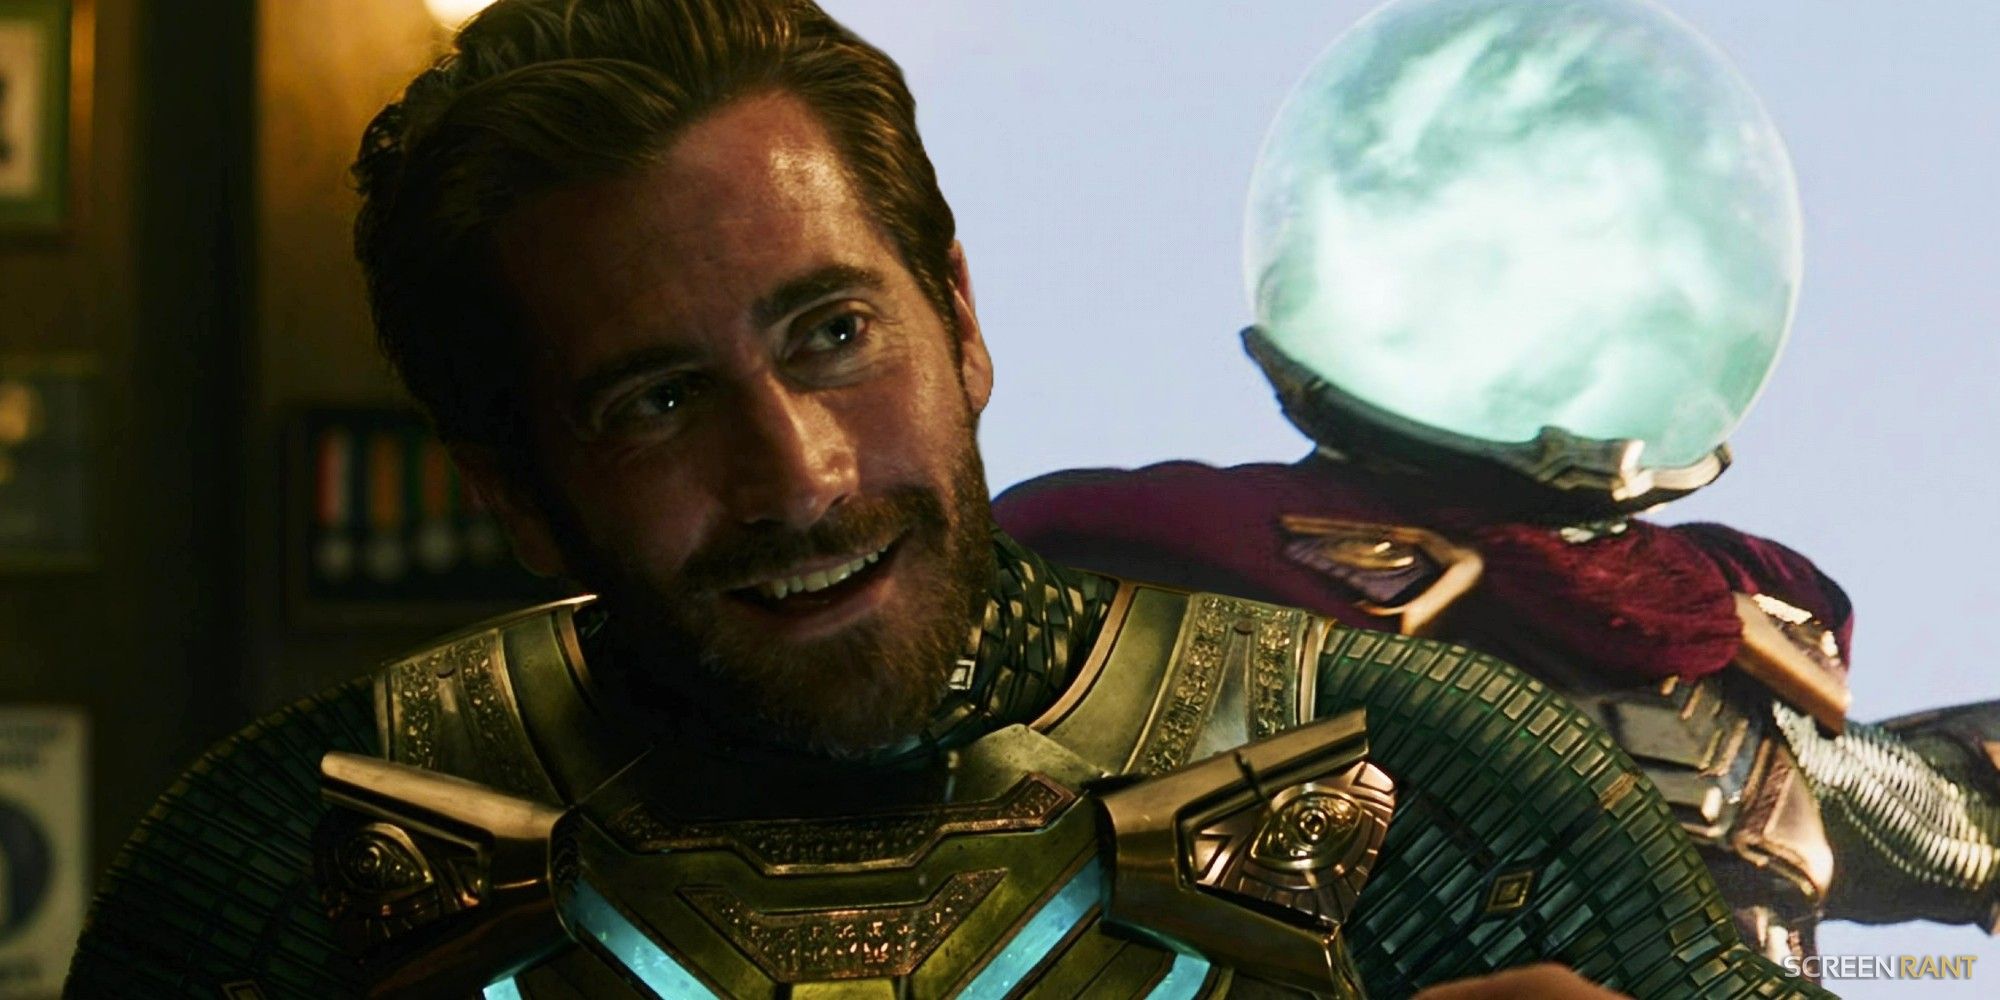 Jake Gyllenhaal as Mysterio in Spider-Man: Far From Home and Mysterio with helmet on